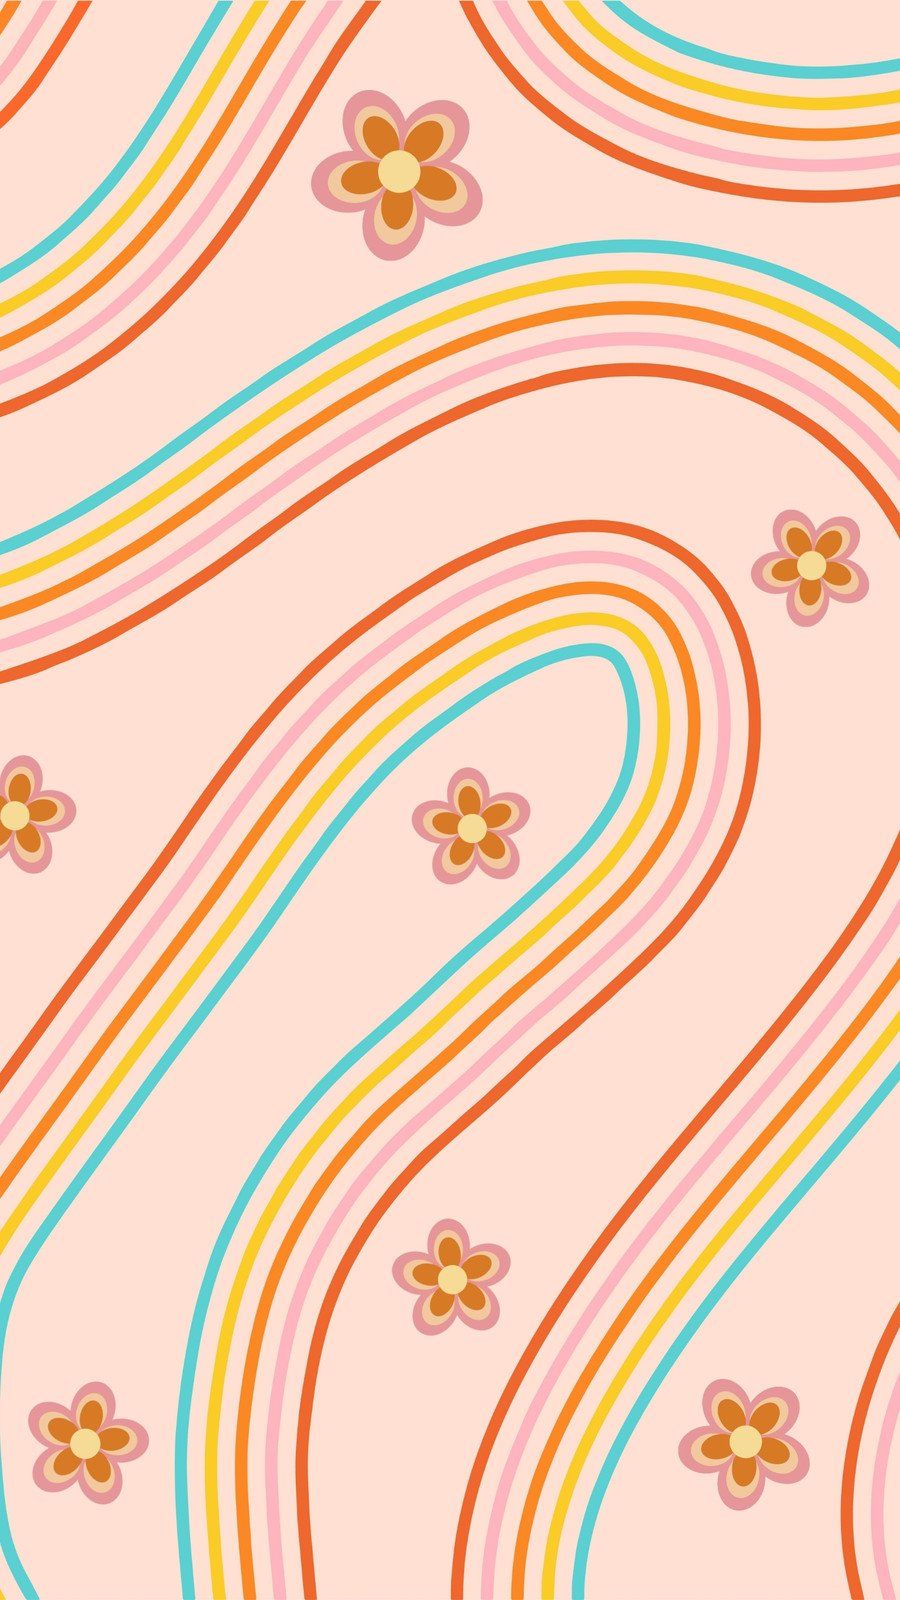 A seamless pattern of rainbow colored flowers and lines - Retro, vintage